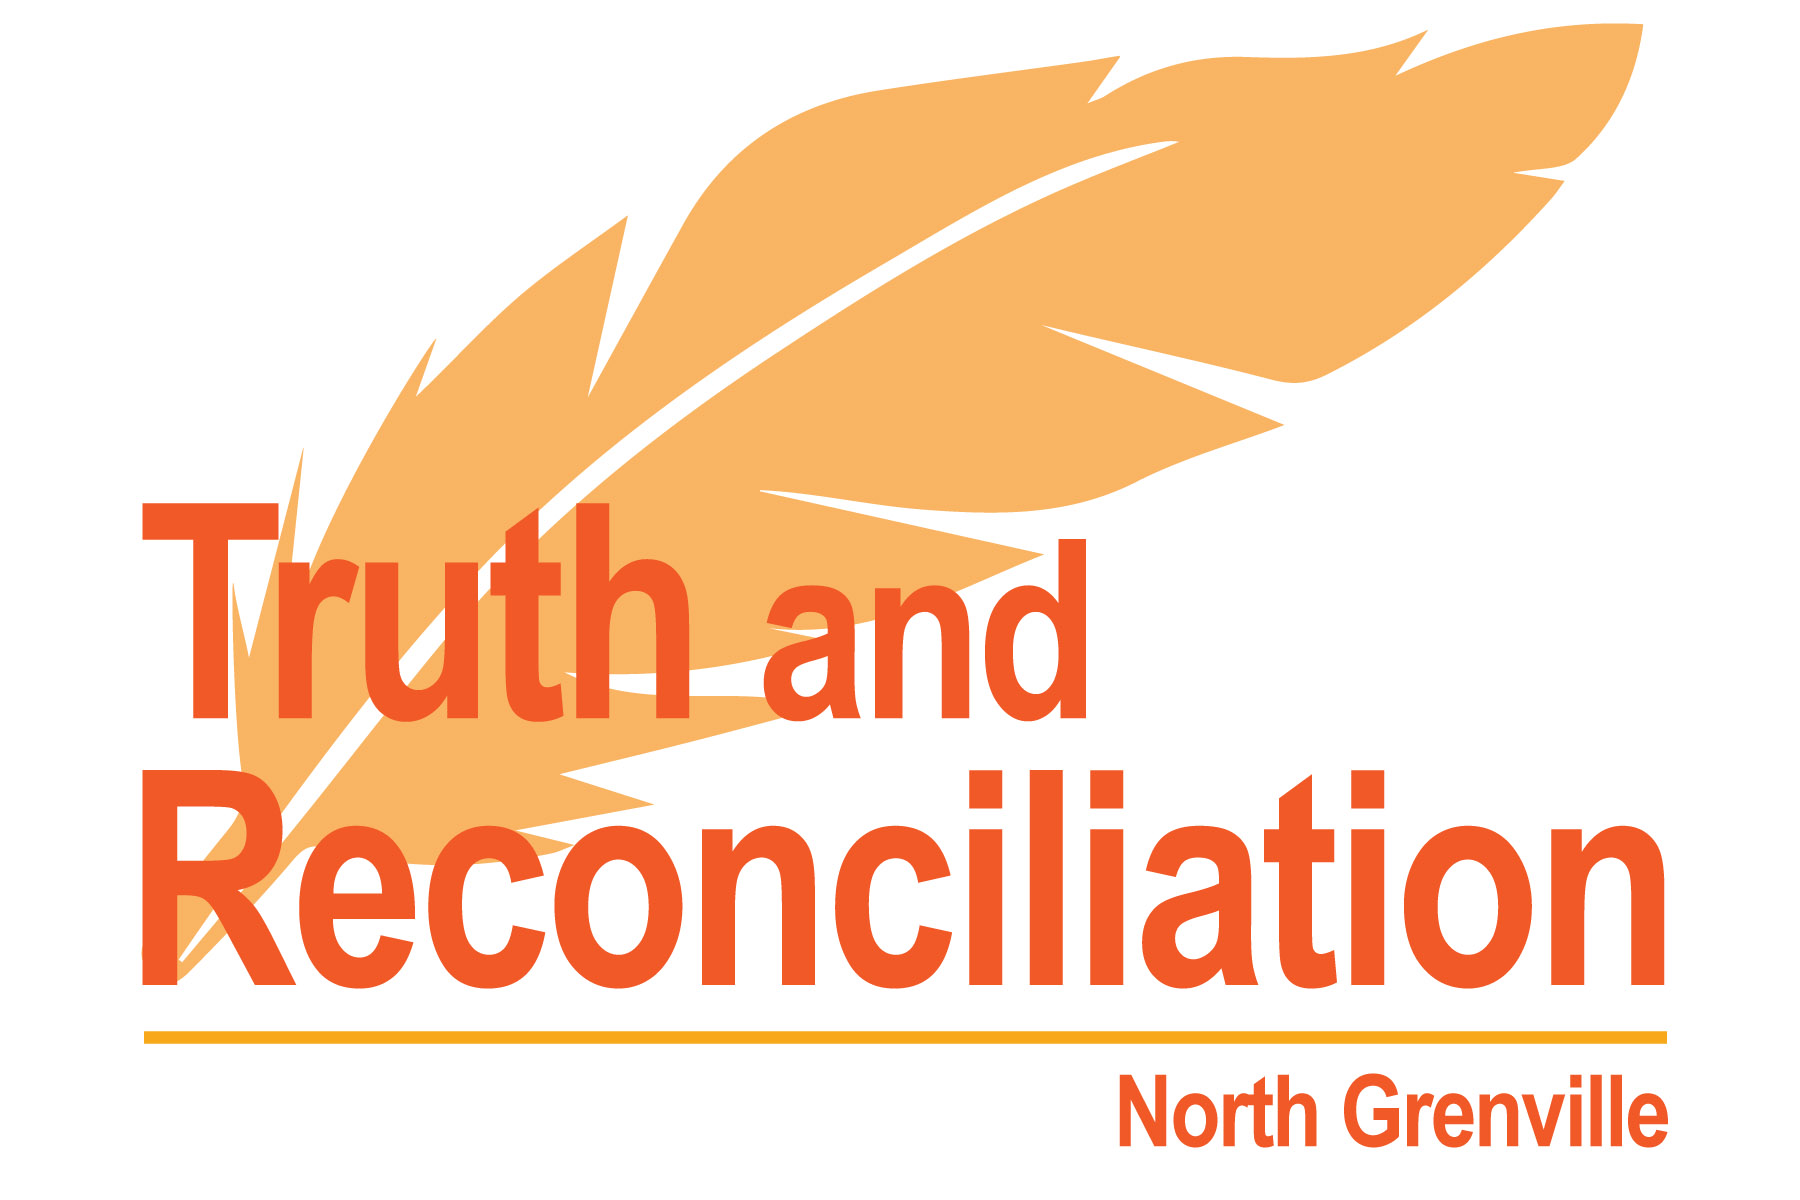 North Grenville Indigenous Advisory Circle to Host National Day for Truth and Reconciliation